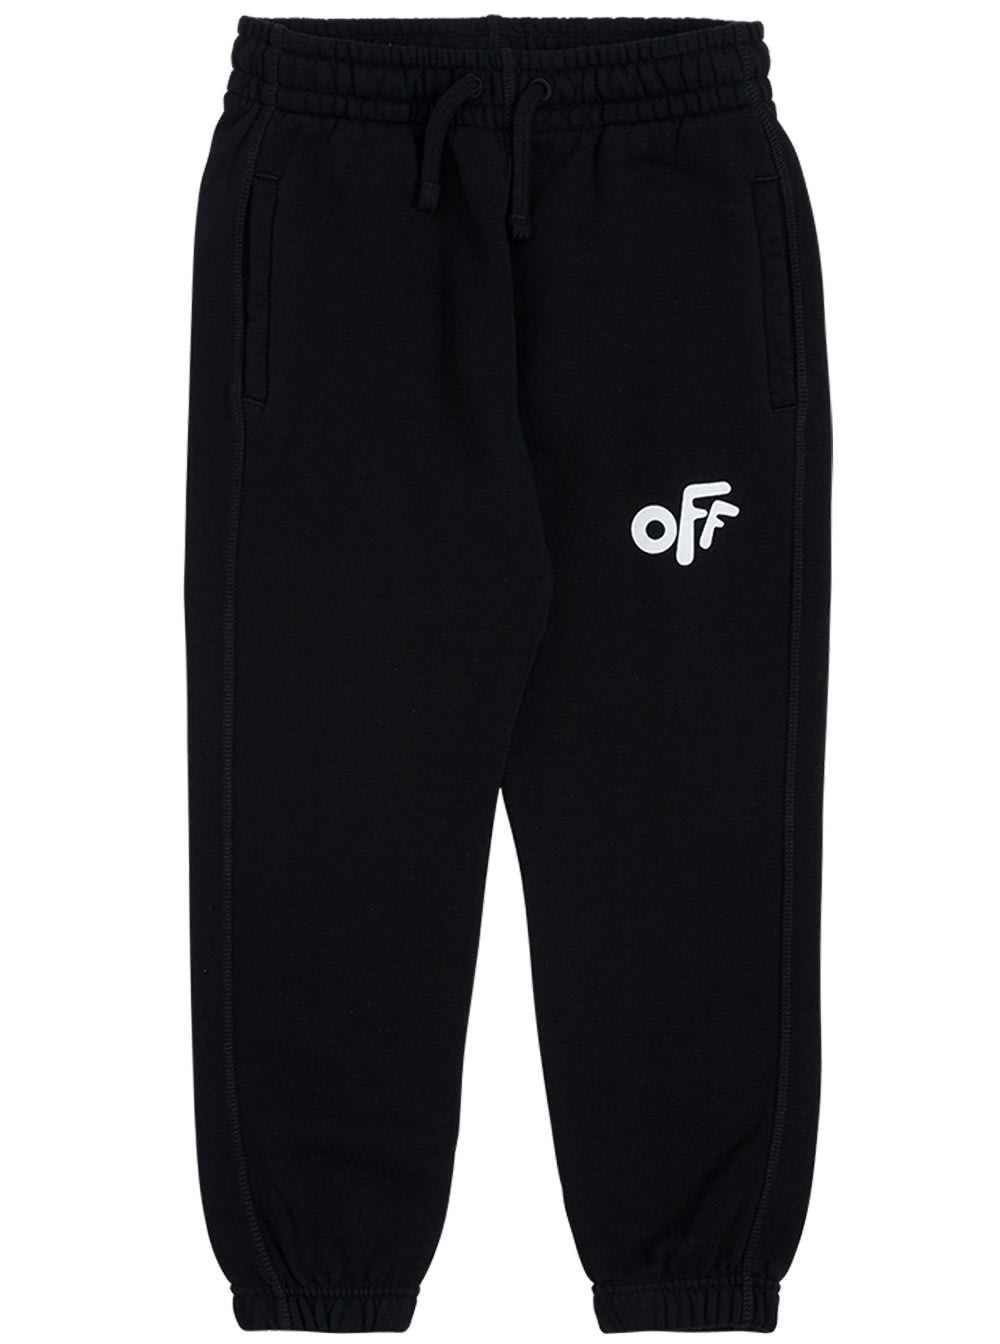 OFF-WHITE BLACK COTTON JOGGERS WITH OFF PRINT,OBCH001F21FLE0011001